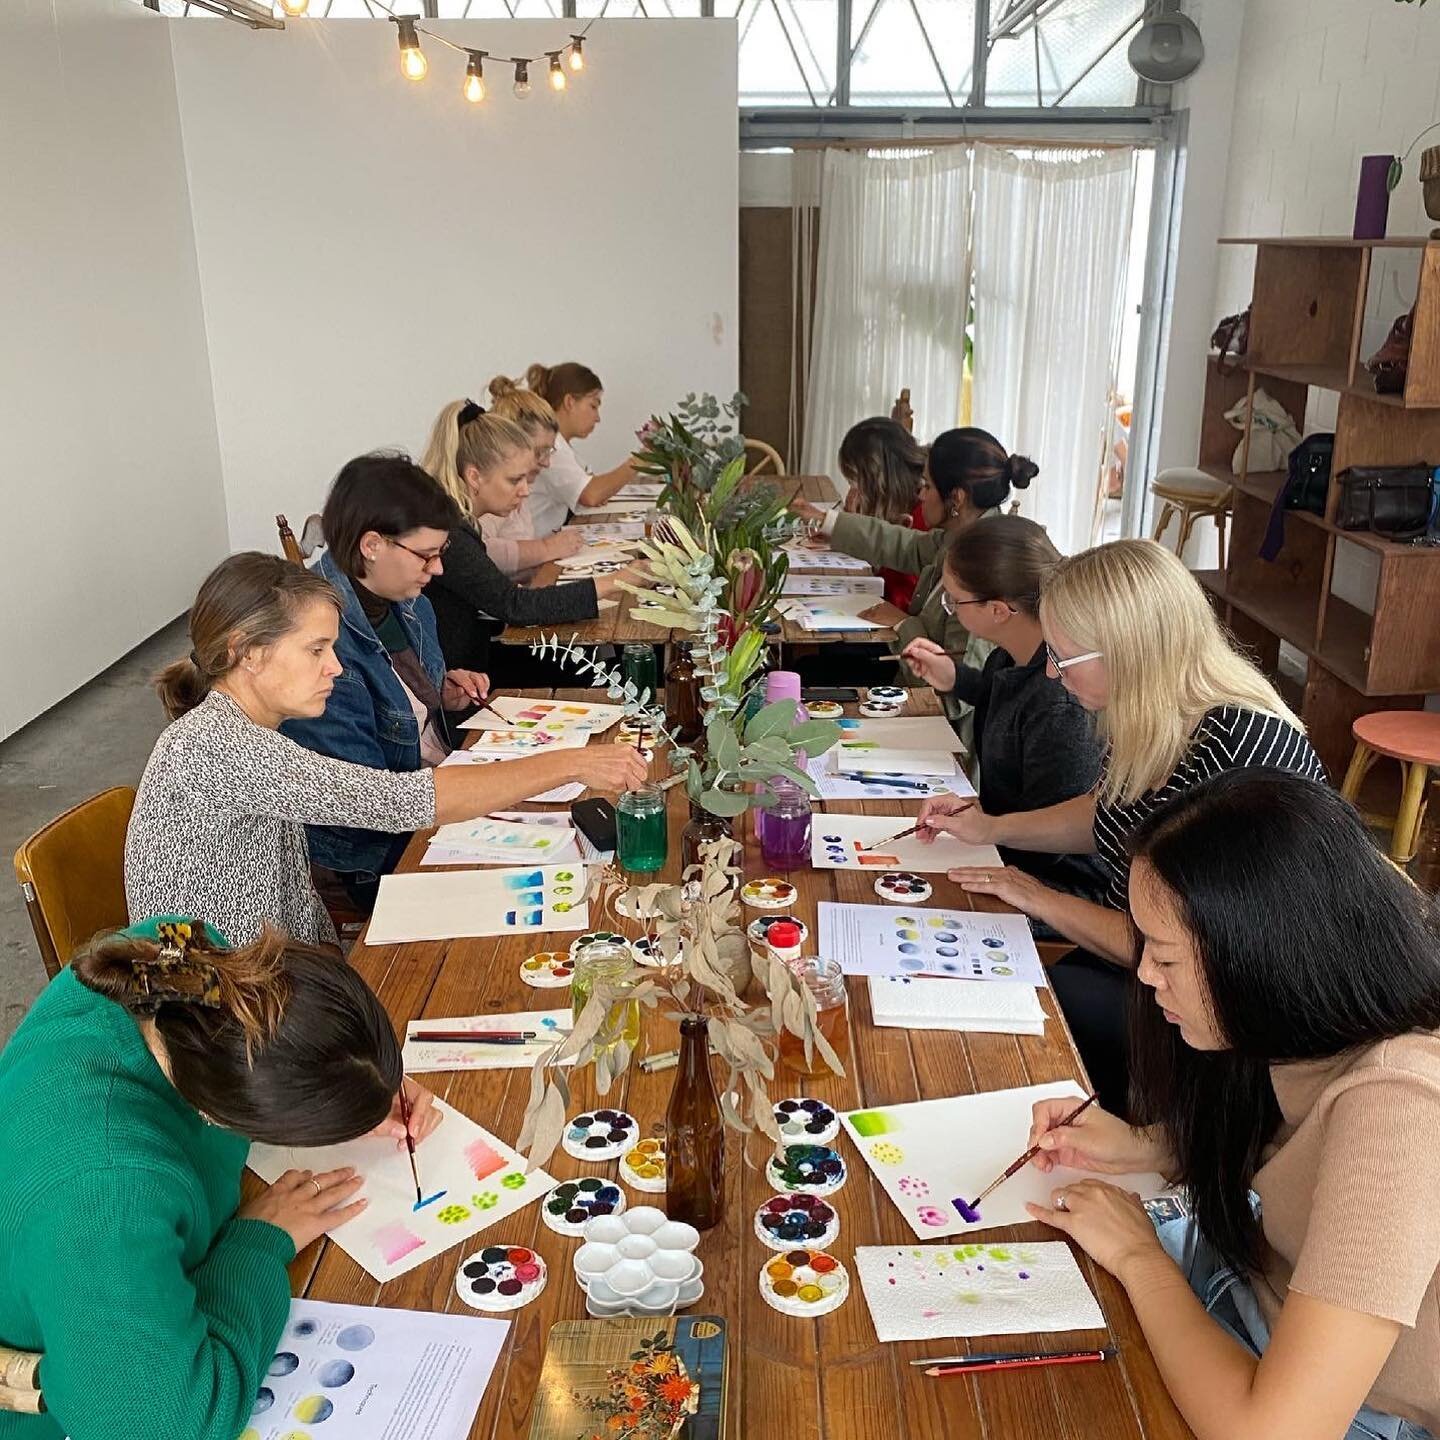 If you have been searching for something creative to do over the summer break, look no further! I have a variety of workshops currently listed on my website 👩&zwj;🎨

🎨 Limited to small groups of eight. 
🎨 Based in my studio in the Adelaide CBD. 
